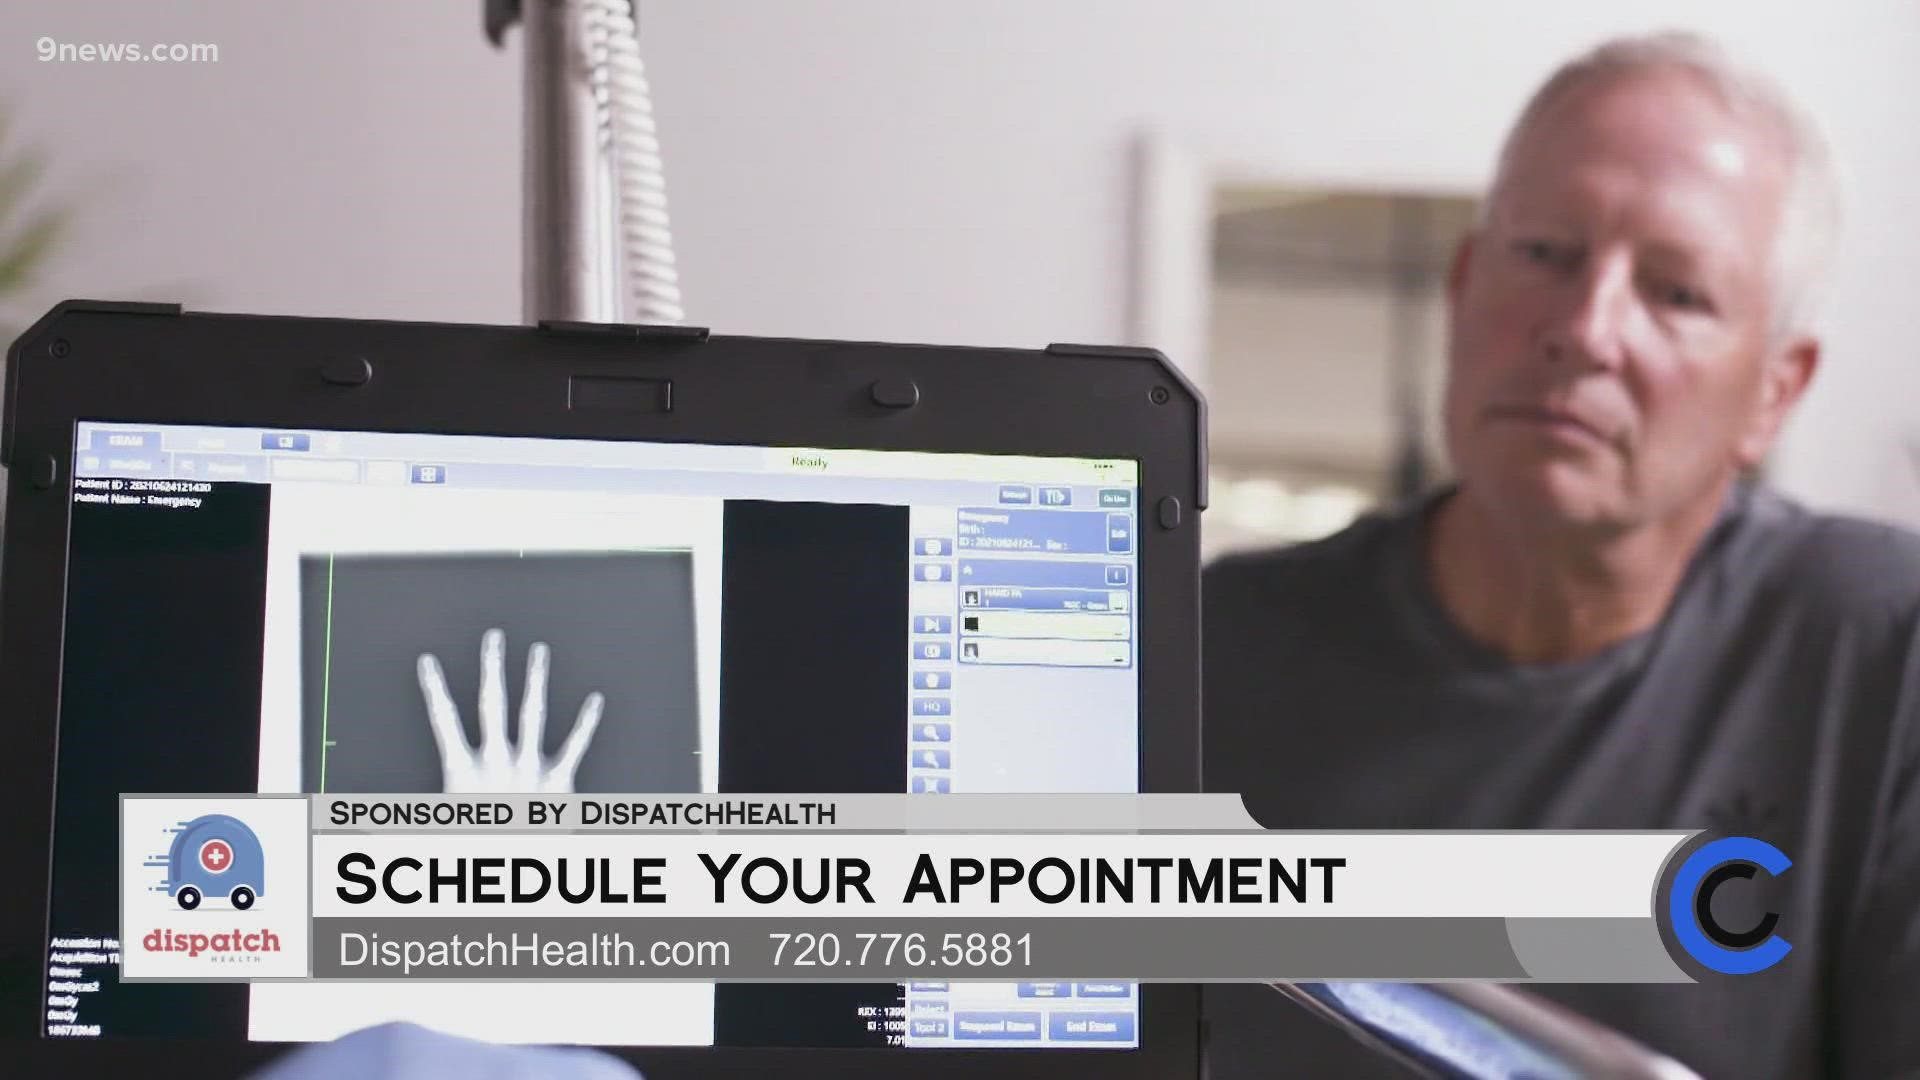 Schedule your appointment with Dispatch Health by calling 720.776.5881 or by visiting DispatchHealth.com. **PAID CONTENT**